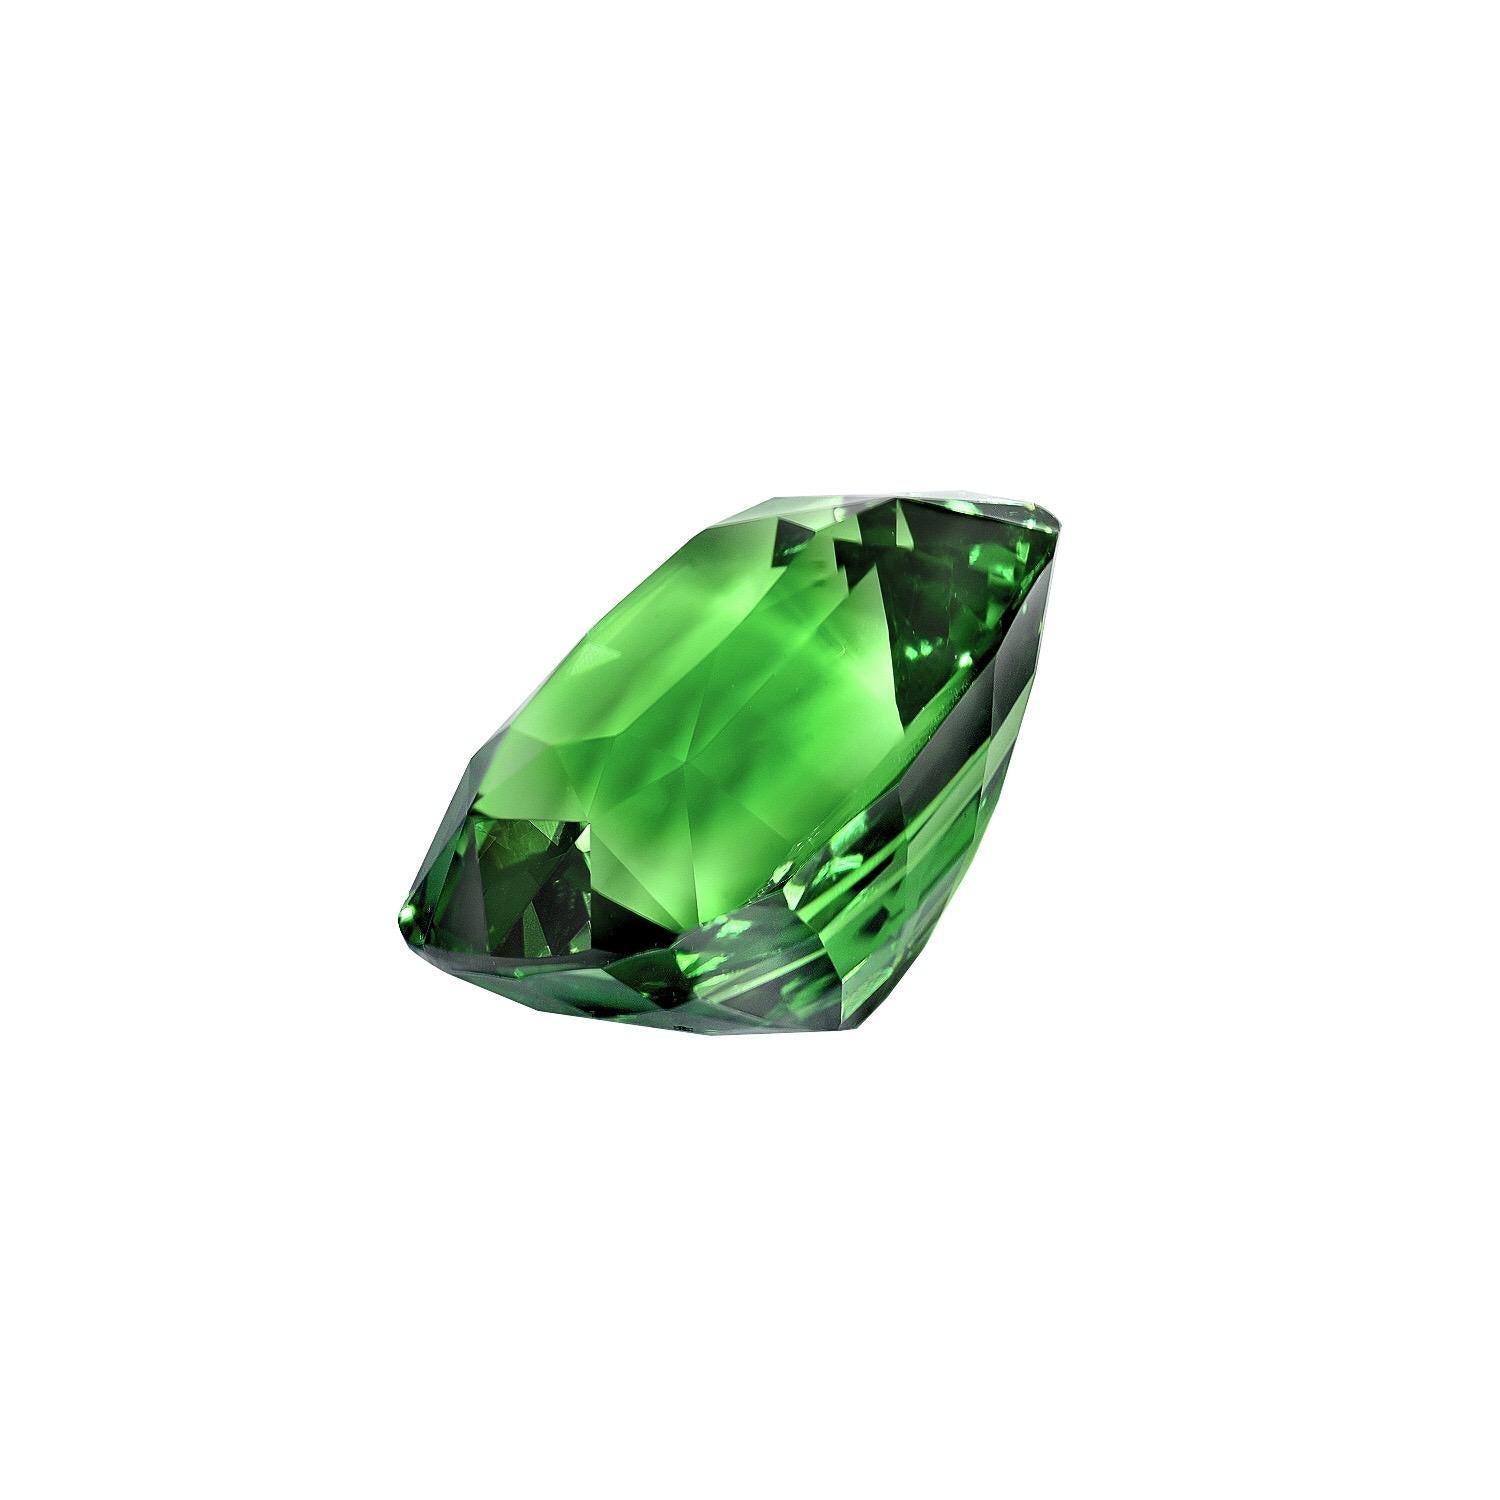 Fine 7.08 carat Tsavorite Garnet cushion cut gem, offered loose to a gemstone connoisseur.
The GIA certificate is attached to the images for your reference,
Returns are accepted and paid by us within 7 days of delivery.
We offer ultra fine custom